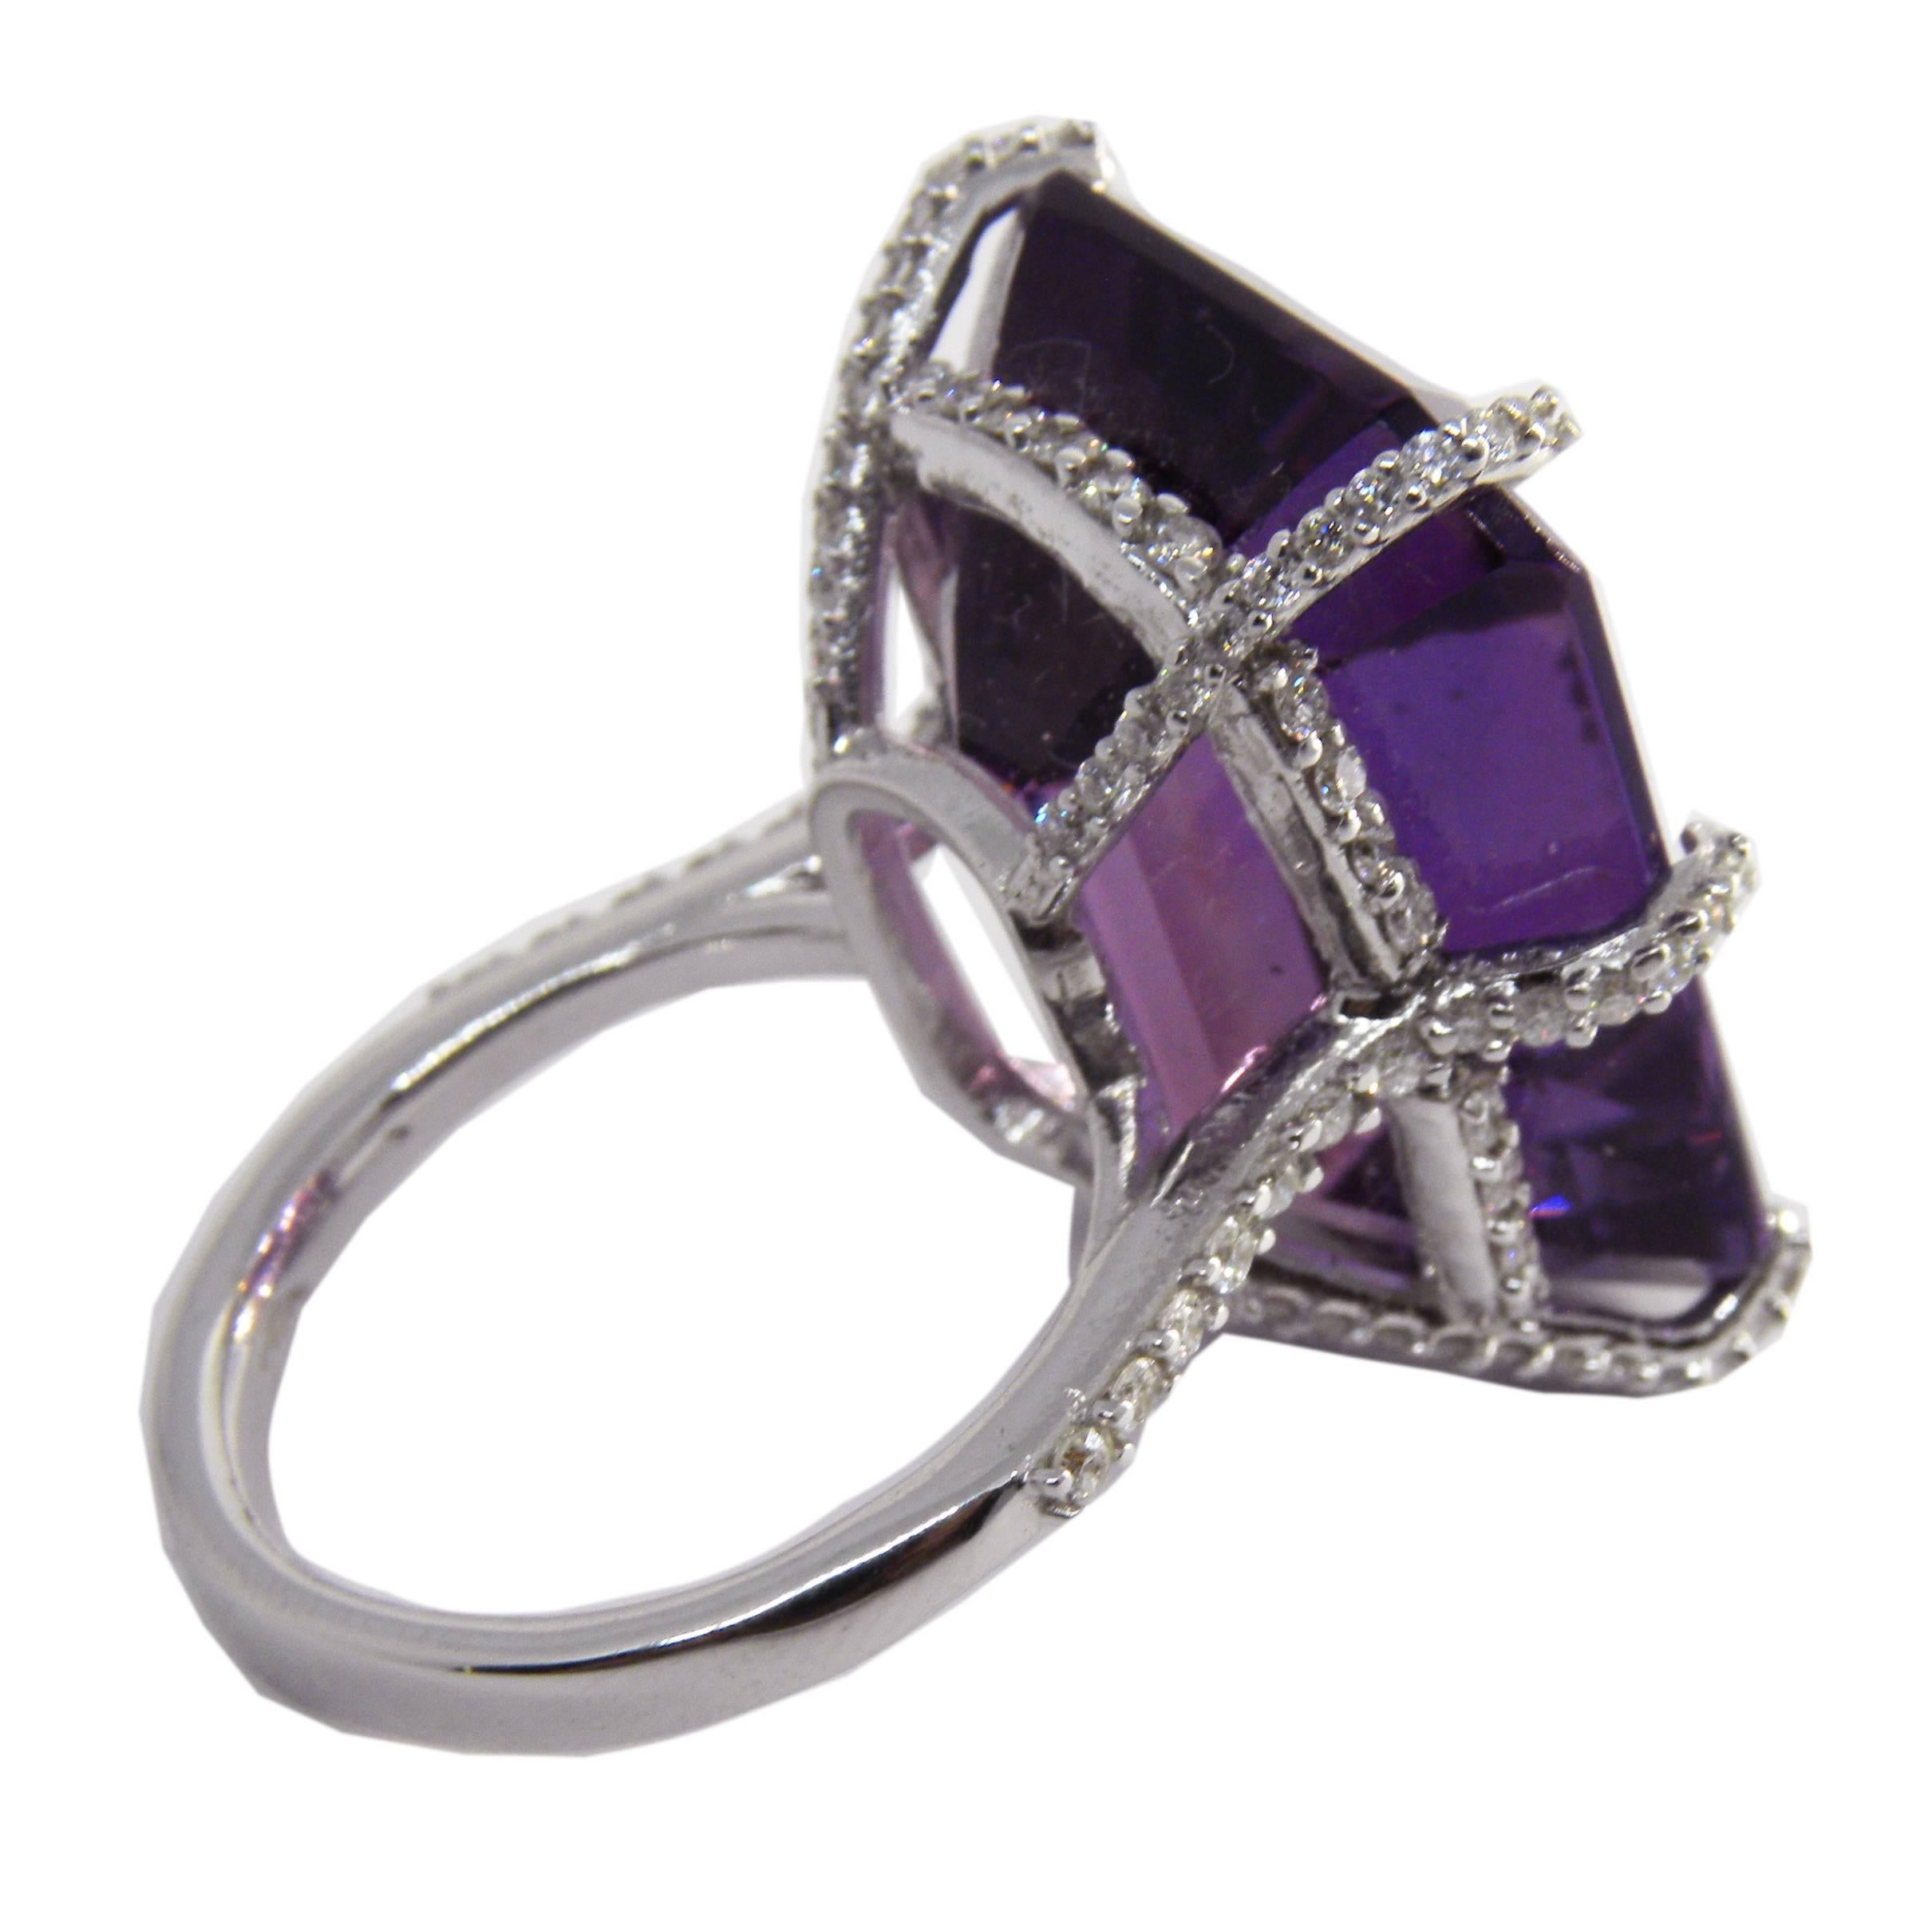 Sumptuous one-of-a-kind Cocktail Ring featuring a 31.76 Carat Emerald Cut natural Amethyst  in a white diamond 18 Carat  white gold Setting
Amethyst 23.80x17.60mm
White Diamond Round brilliant cut 1.05 Carat
18k White Gold 8.20g
Us Size 6 3/4
French